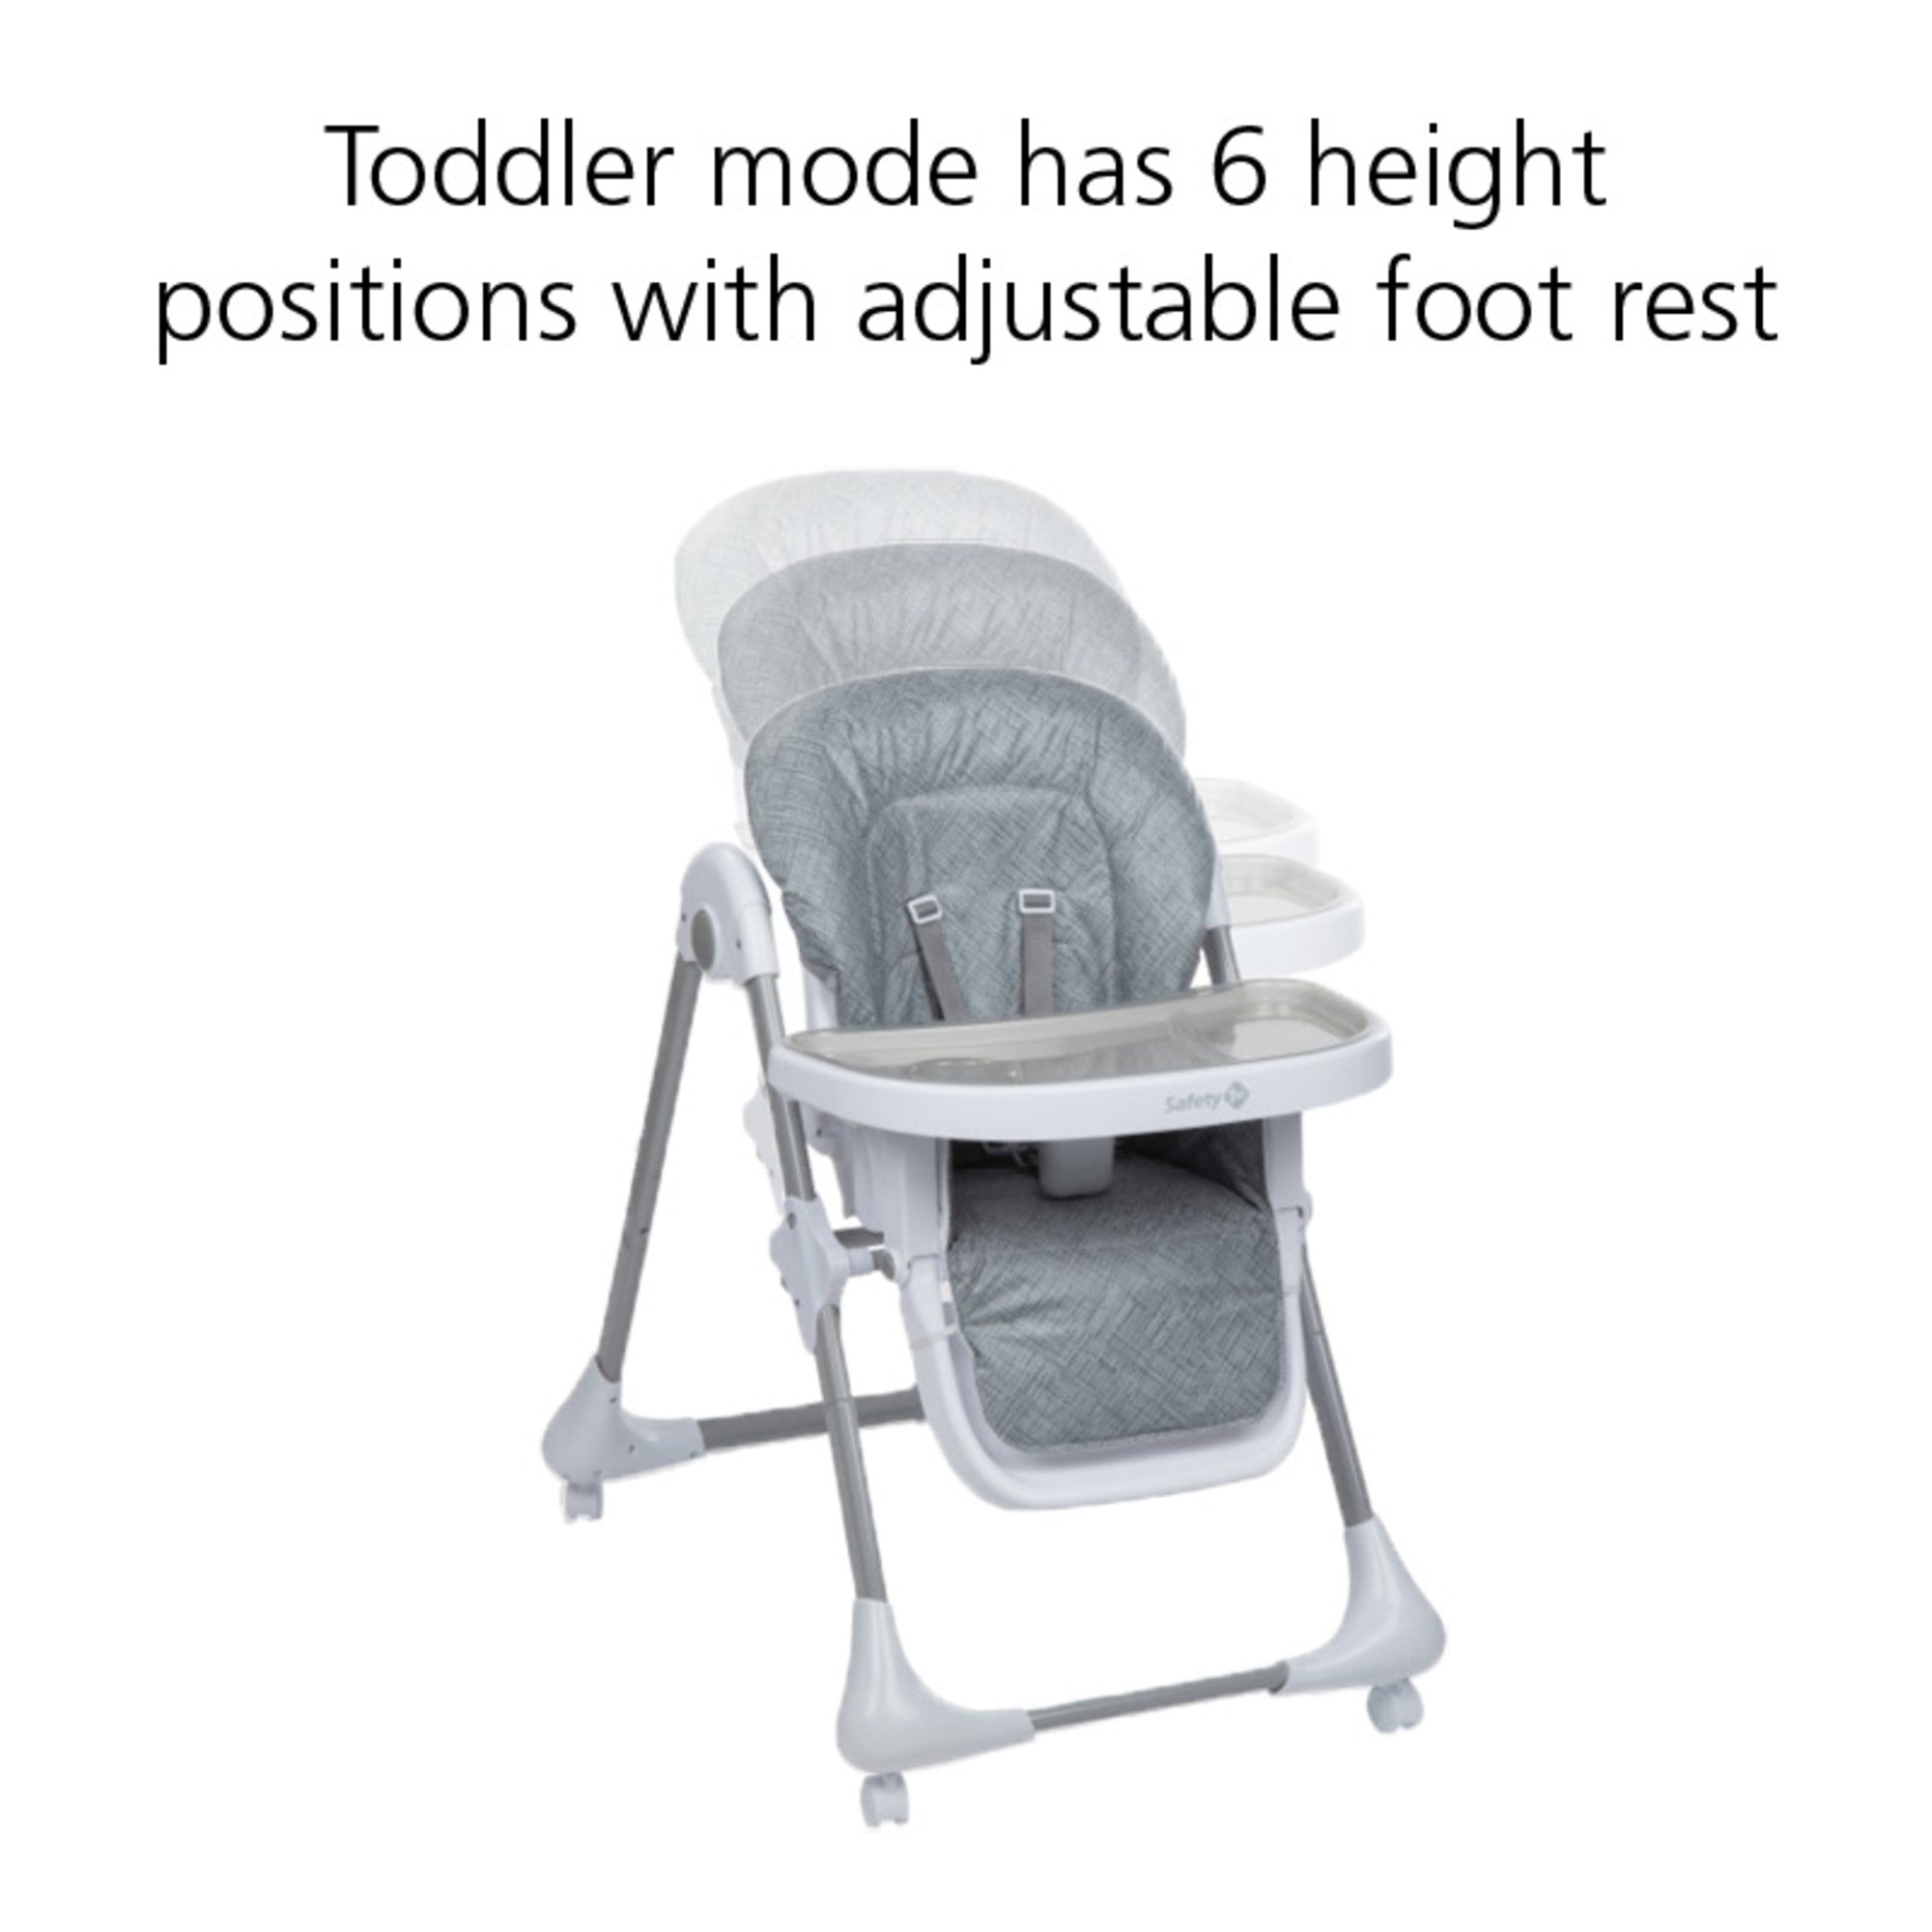 Toddler mode has 6 height positions with adjustable foot rest